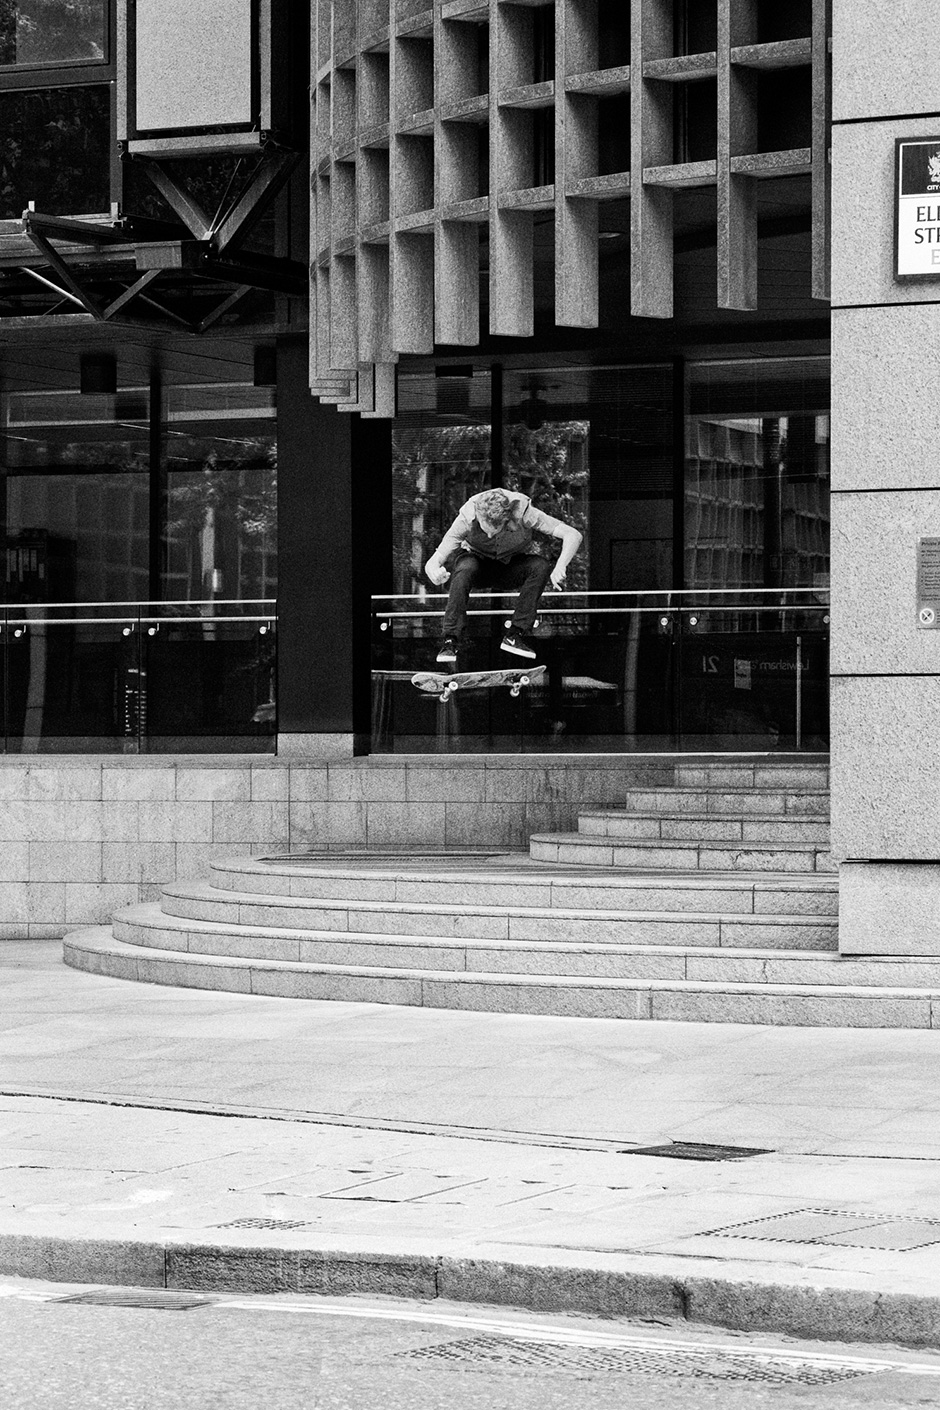 Neil Smith's first attempt at nollie heelflipping the Liverpool Street double set. Shot by Henry Kingsford